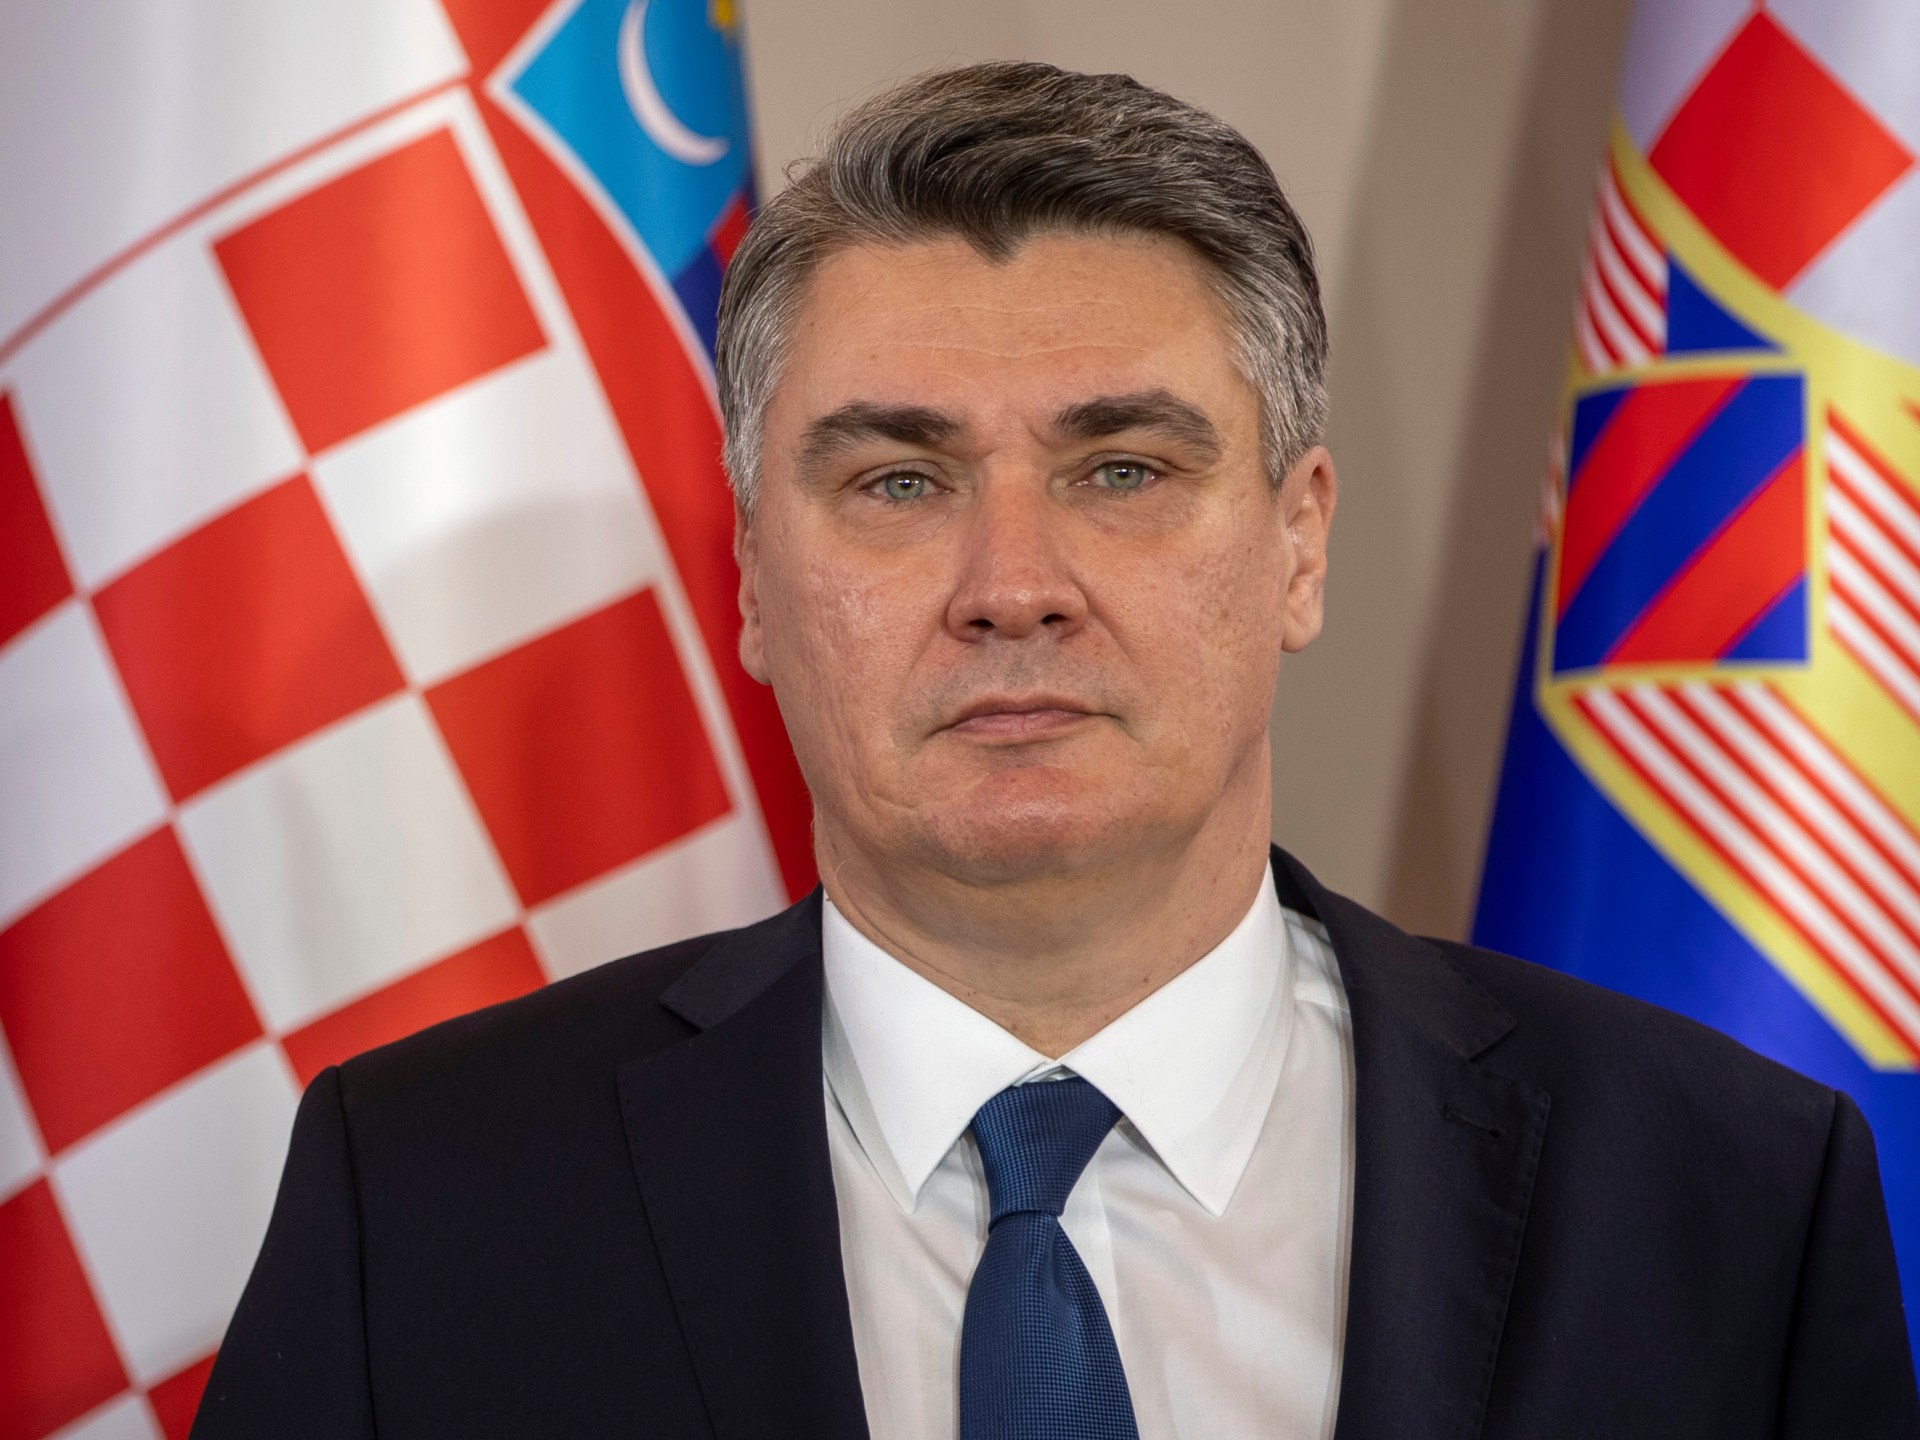 Croatia’s top court bars President Milanovic from becoming prime minister